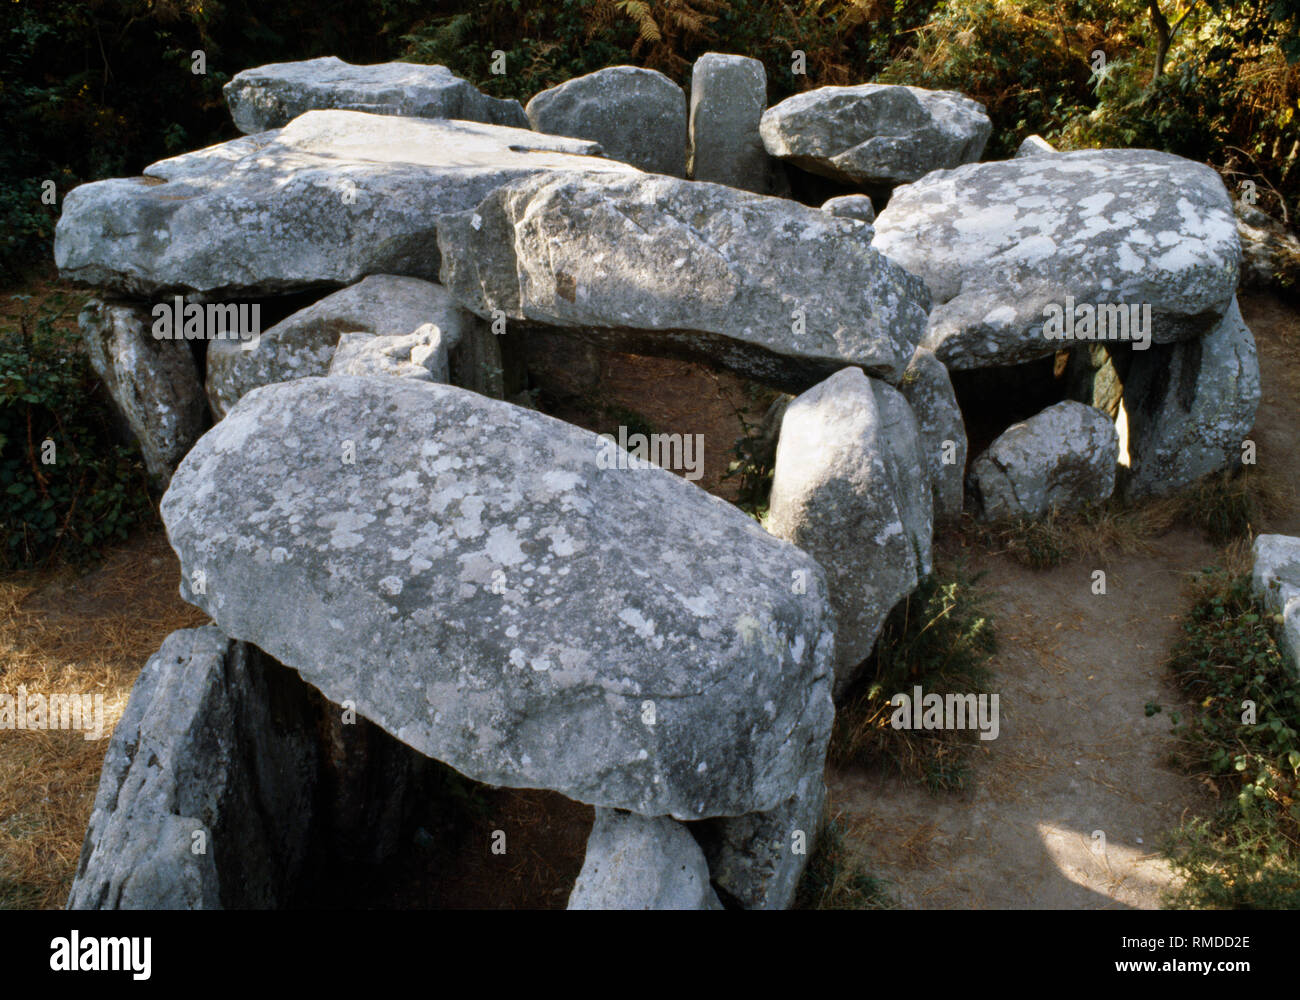 https://c8.alamy.com/comp/RMDD2E/view-nw-showing-exposed-entrance-passage-chambers-of-man-croch-man-groh-t-shaped-neolithic-passage-grave-erdeven-carnac-brittany-france-RMDD2E.jpg